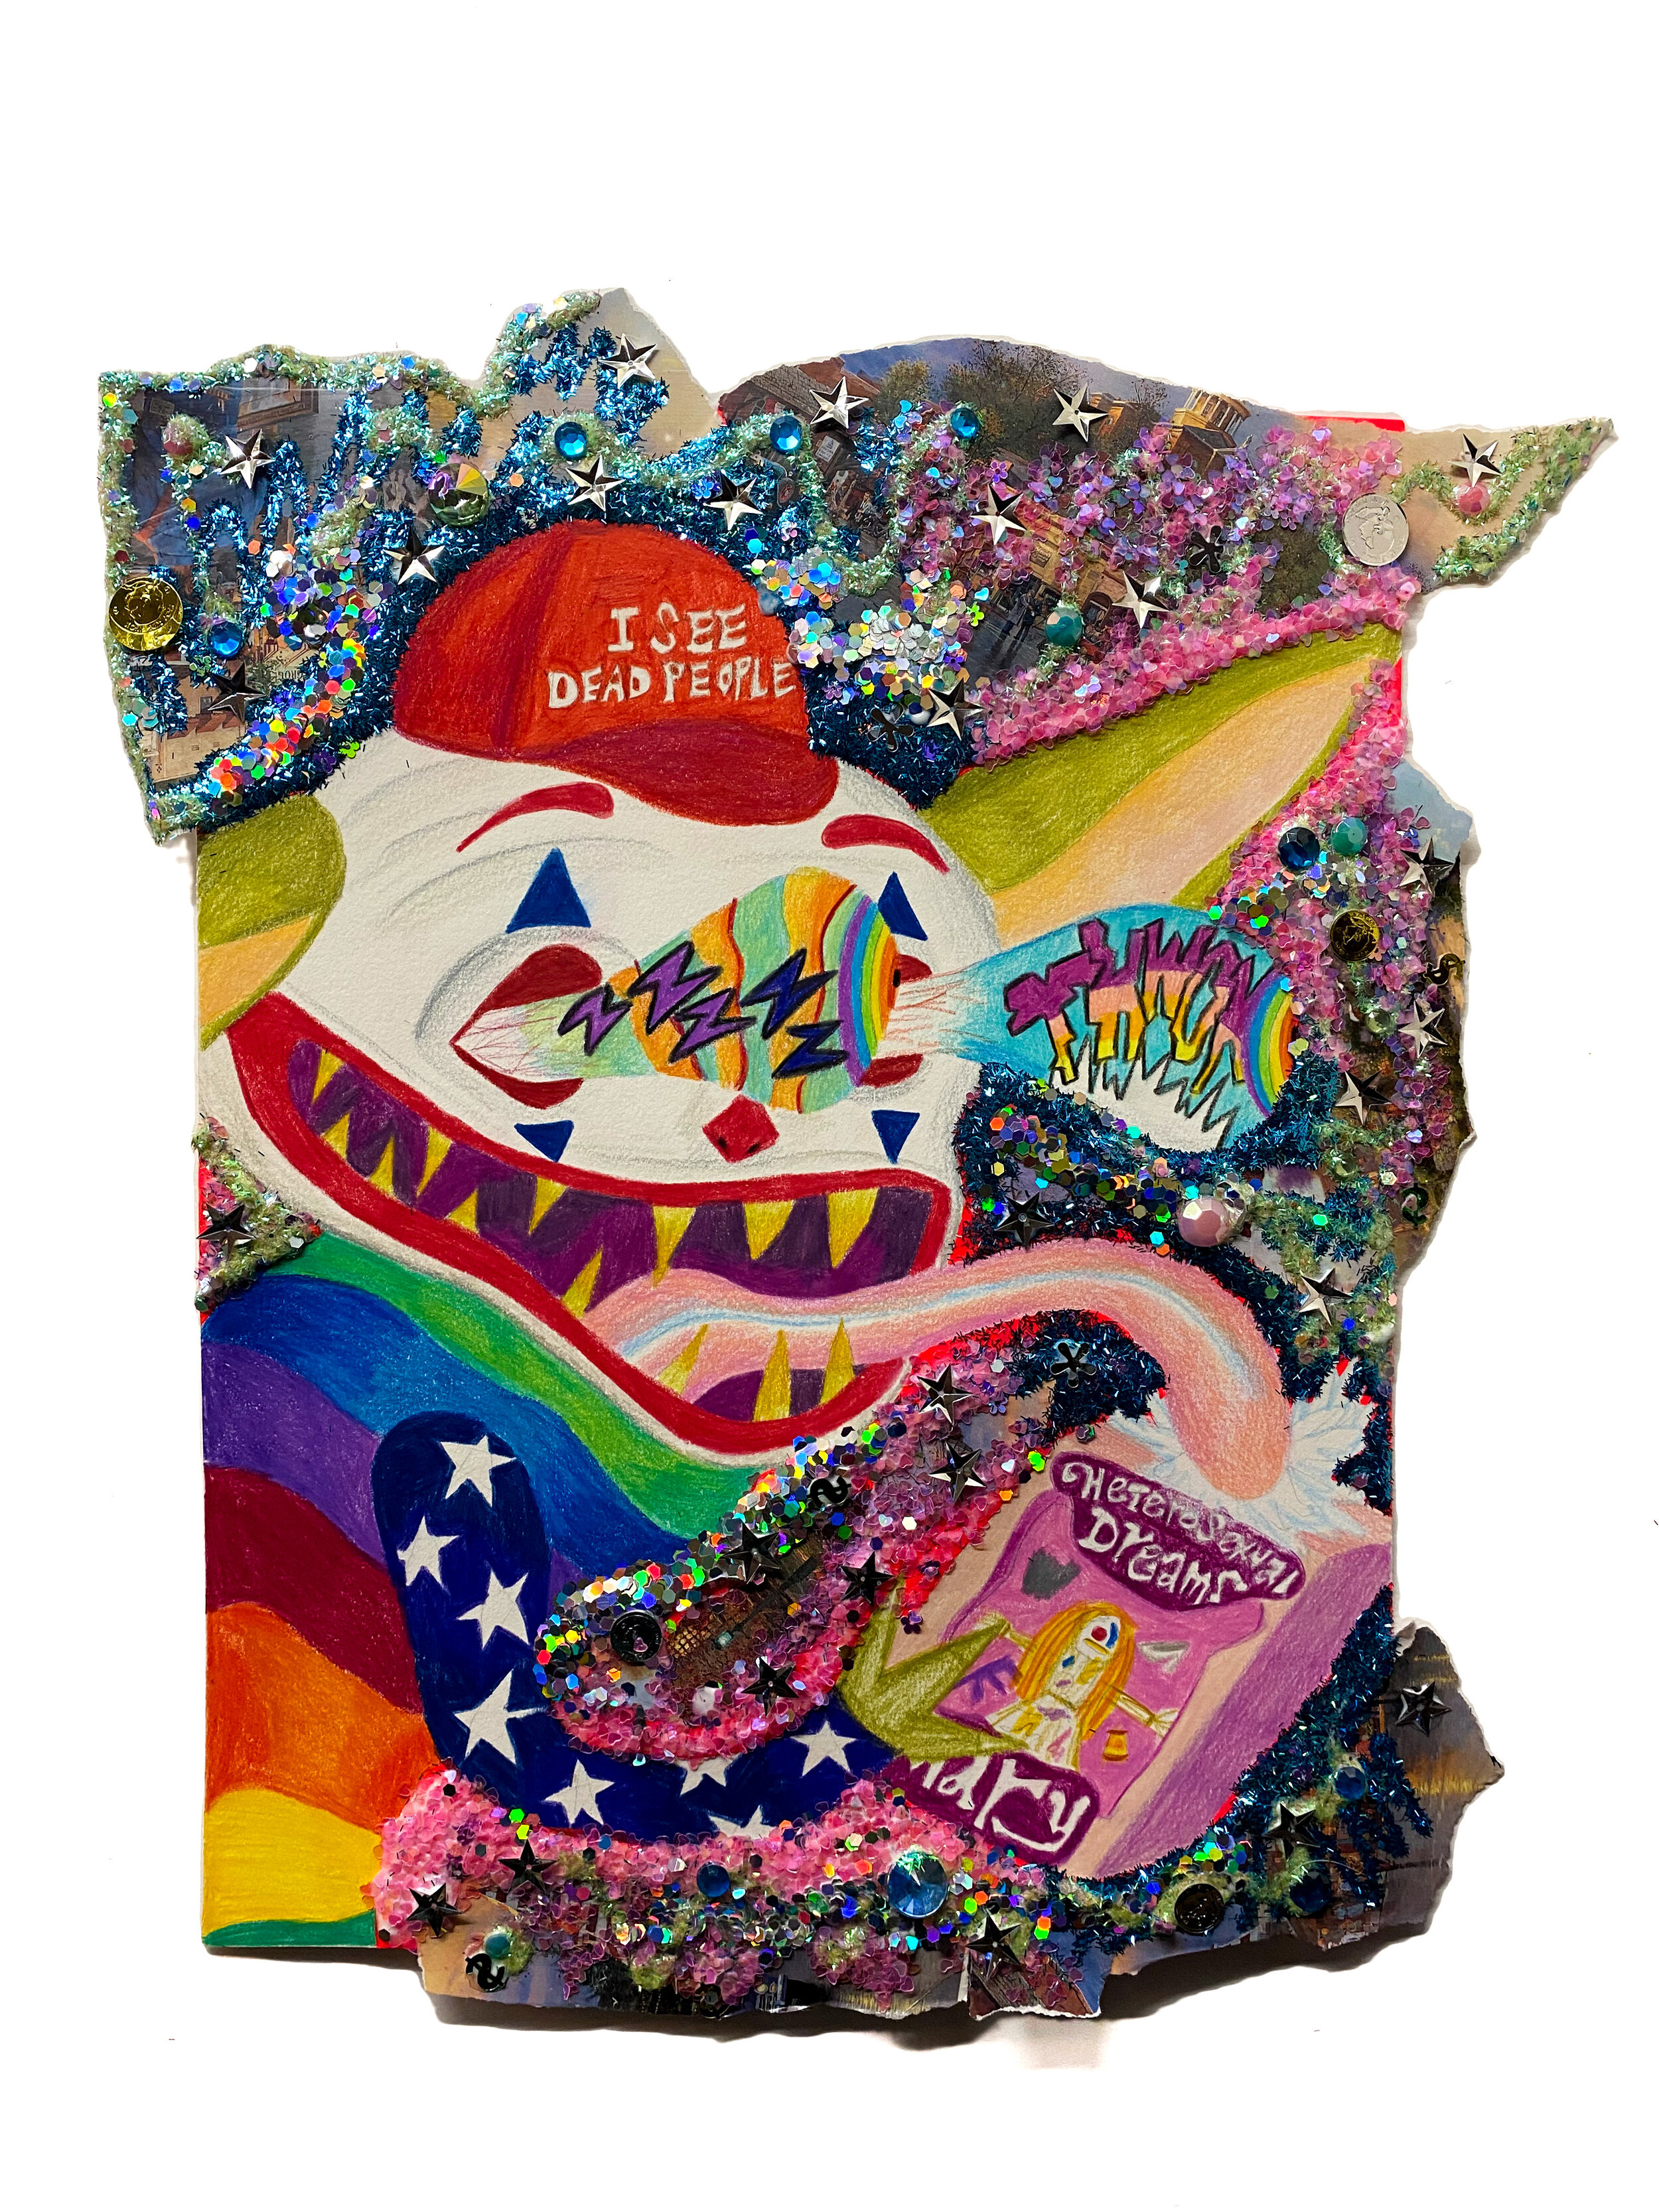   Baby Grogu in 2019 Joker Make Up and Heterosexual Dreams Mary Corn Husk Doll,  2021  Approximately 16 x 14 inches (40.64 x 35.56 cm.)  Colored pencil, sequins, plastic gems, Thomas Kinkade prints, acrylic paint, Elmer's glue, Modge Podge, and glitt